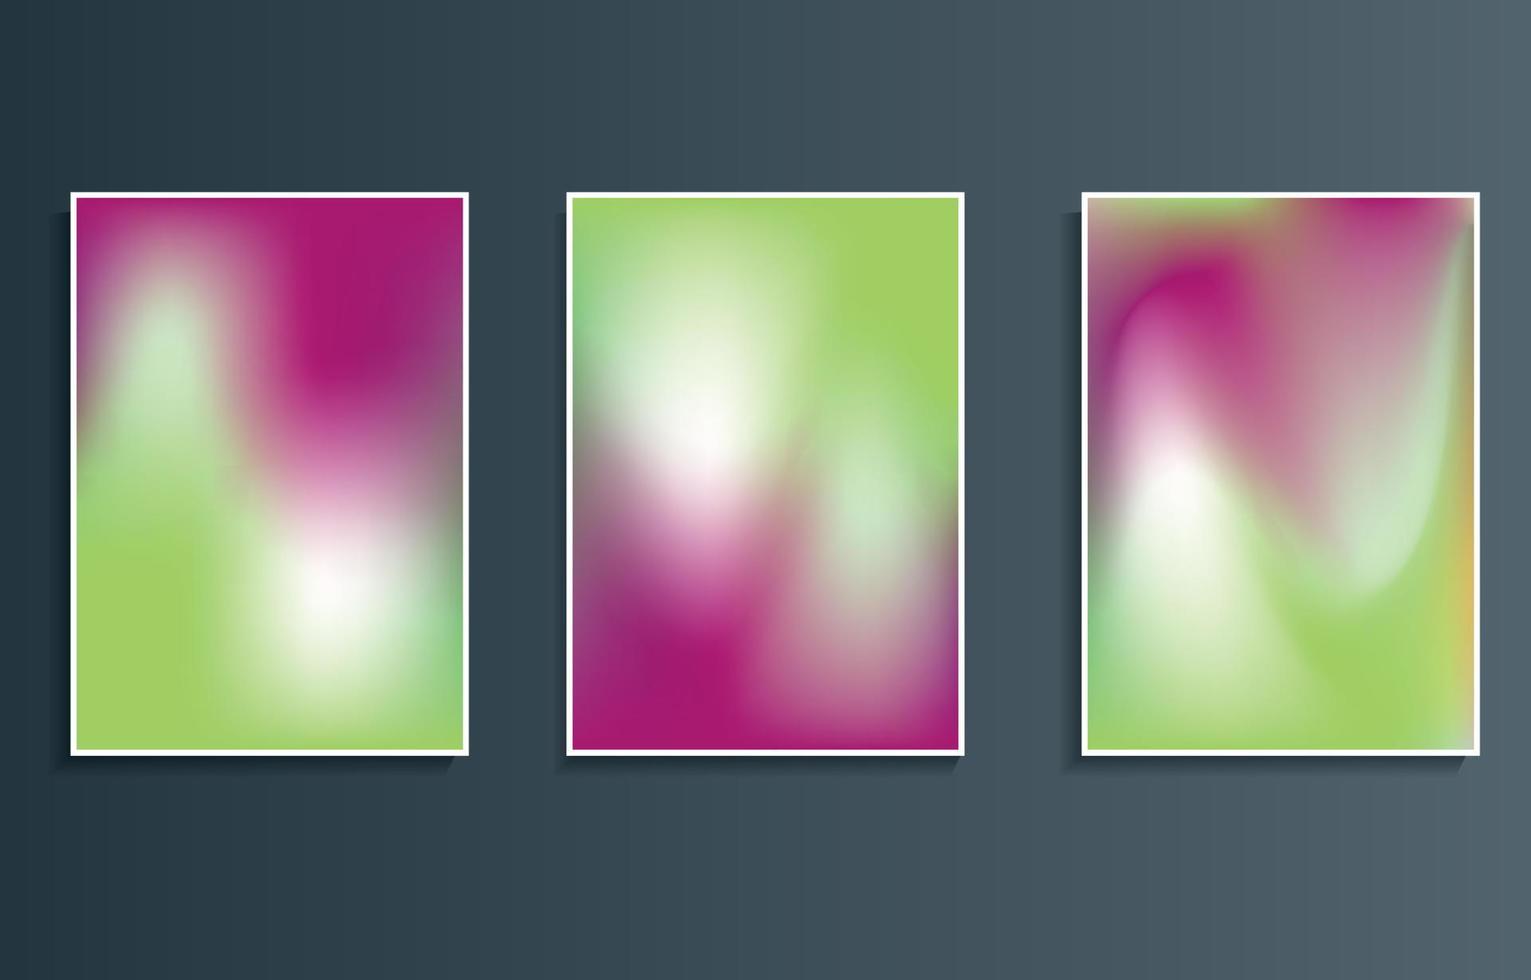 gradient mesh blurred vector design abstract background